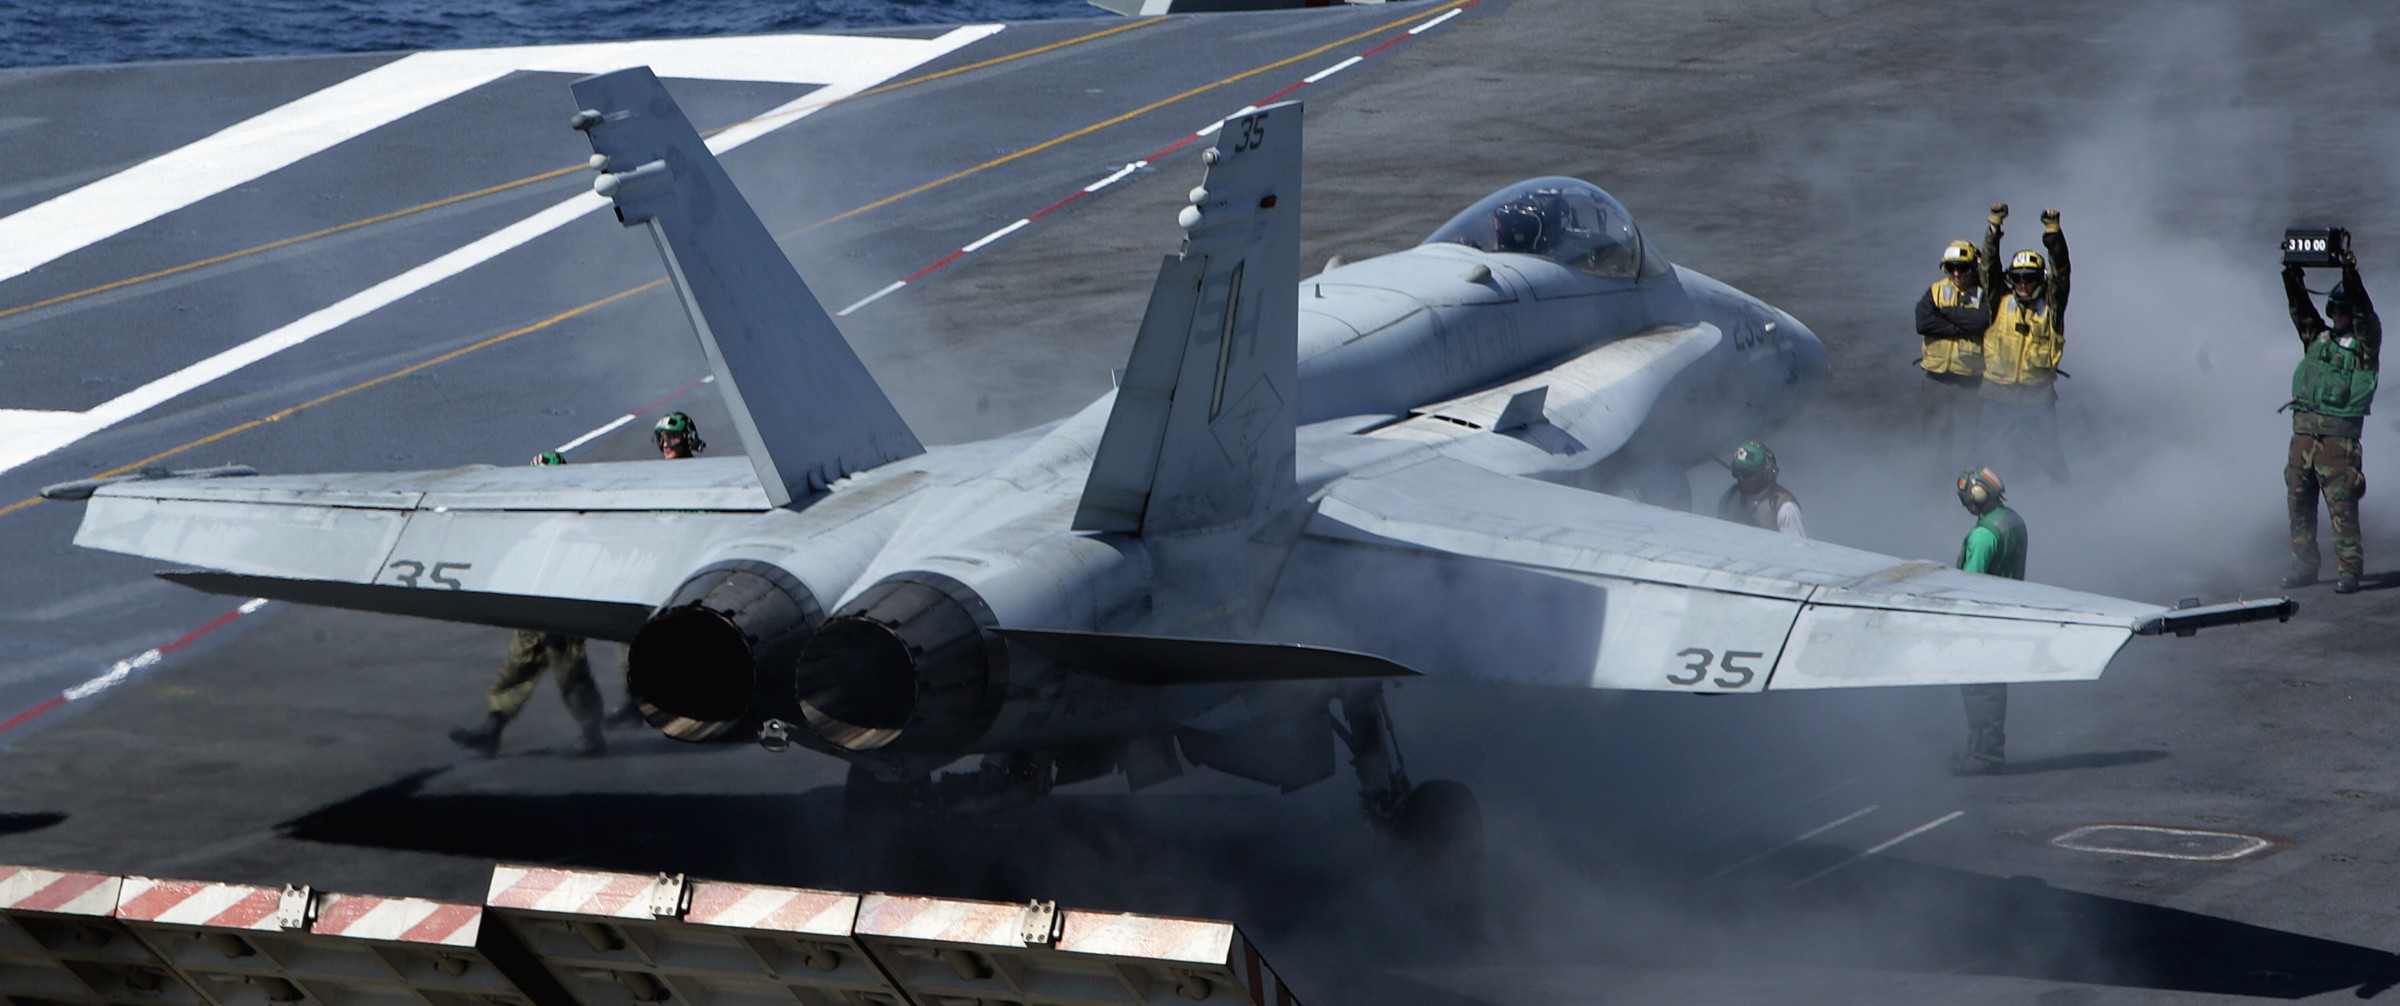 vmfat-101 sharpshooters marine fighter attack training squadron f/a-18c hornet 34